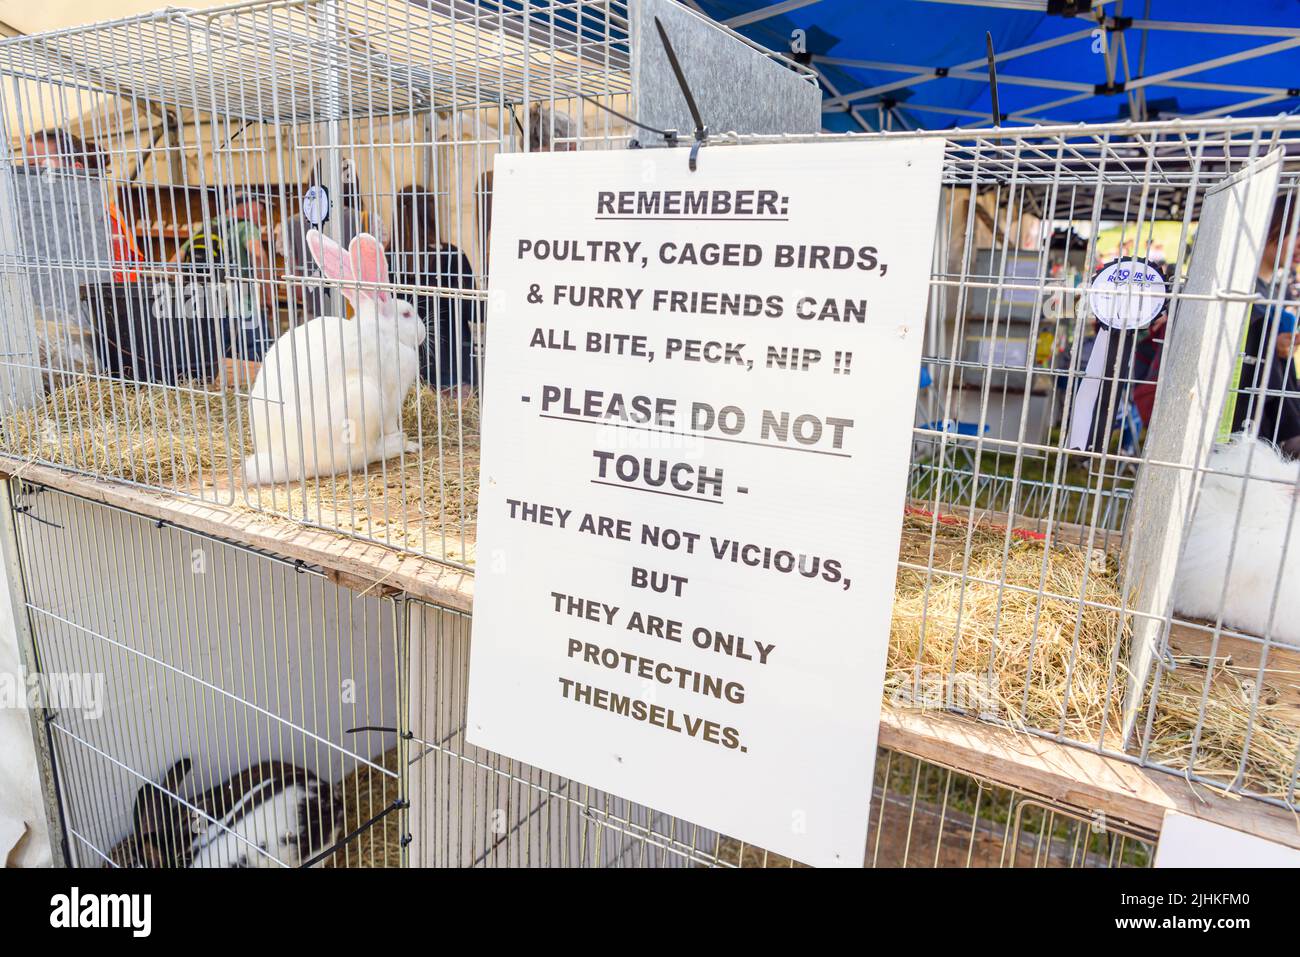 Sign at an agricultural show warning visitors that all animals will bite, peck and nip. Stock Photo